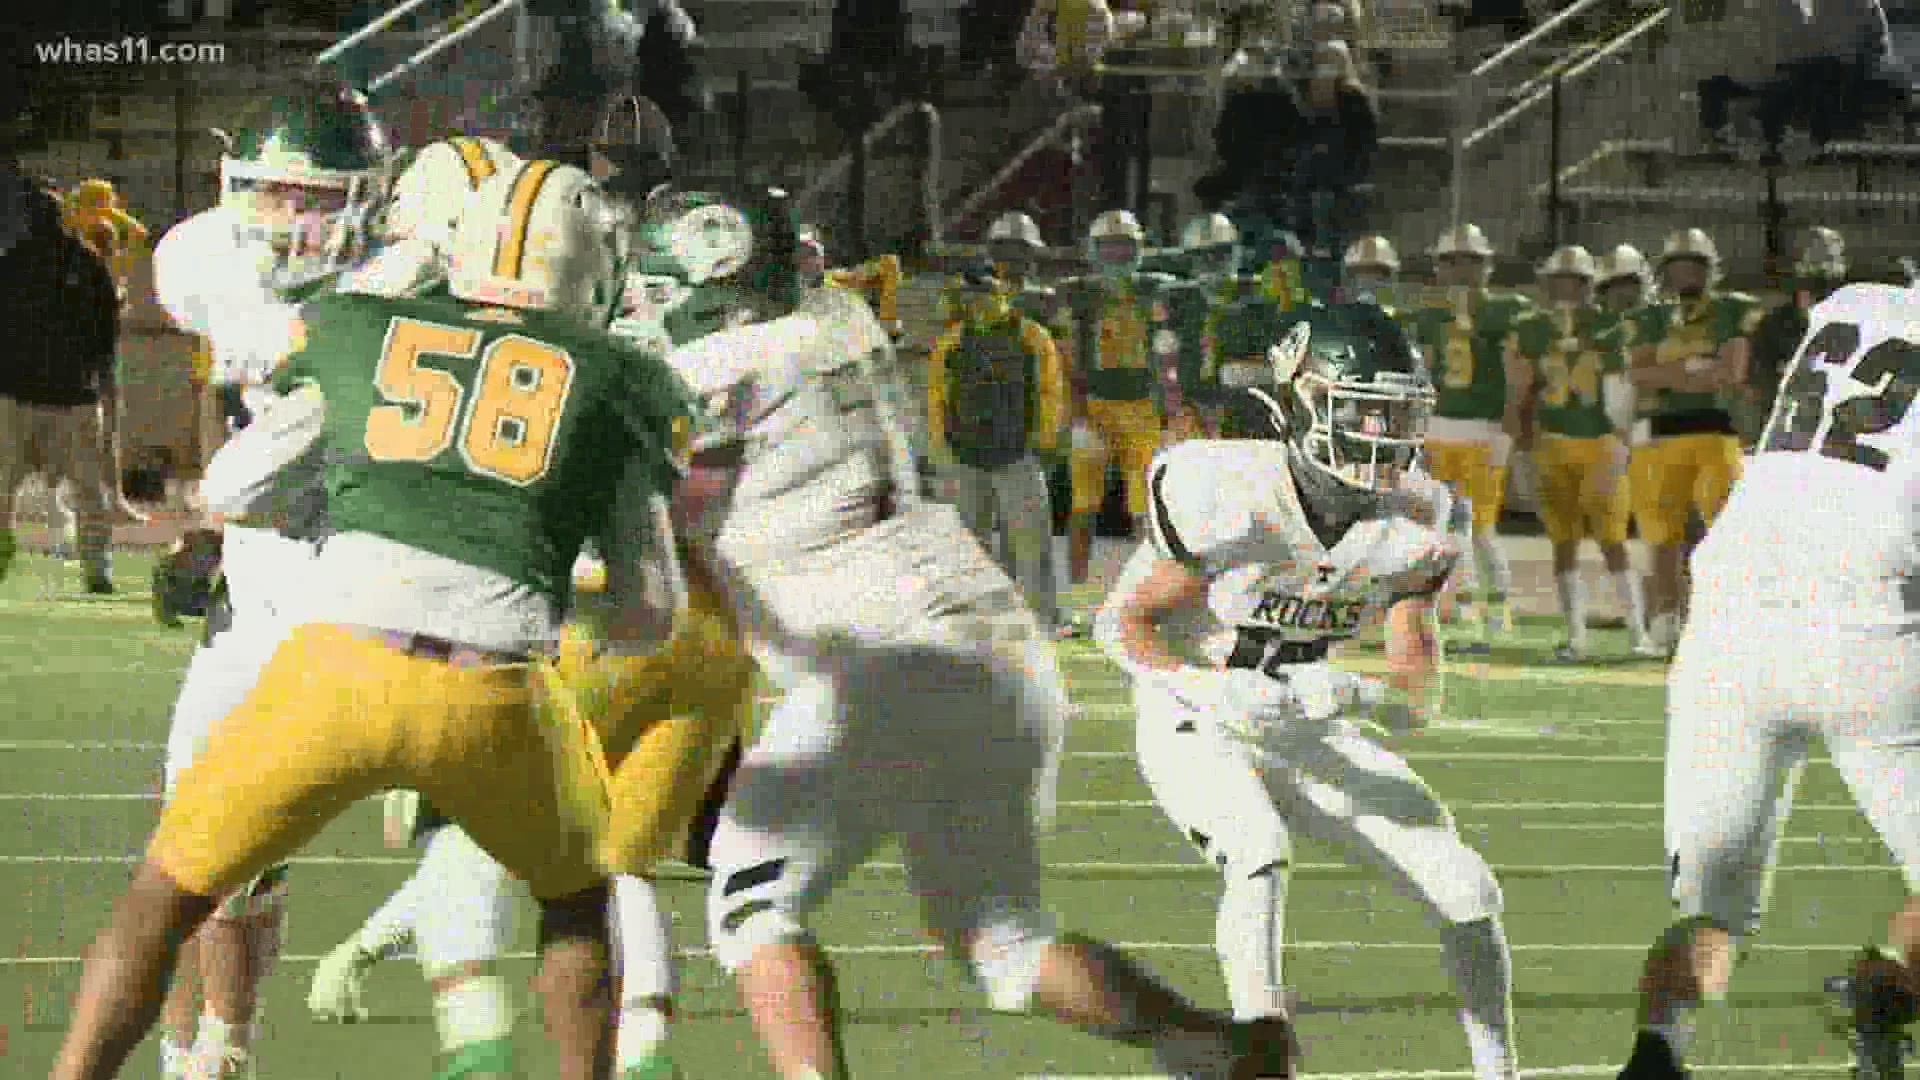 Game of the week: Rivals Trinity and St. X faced off Friday night.